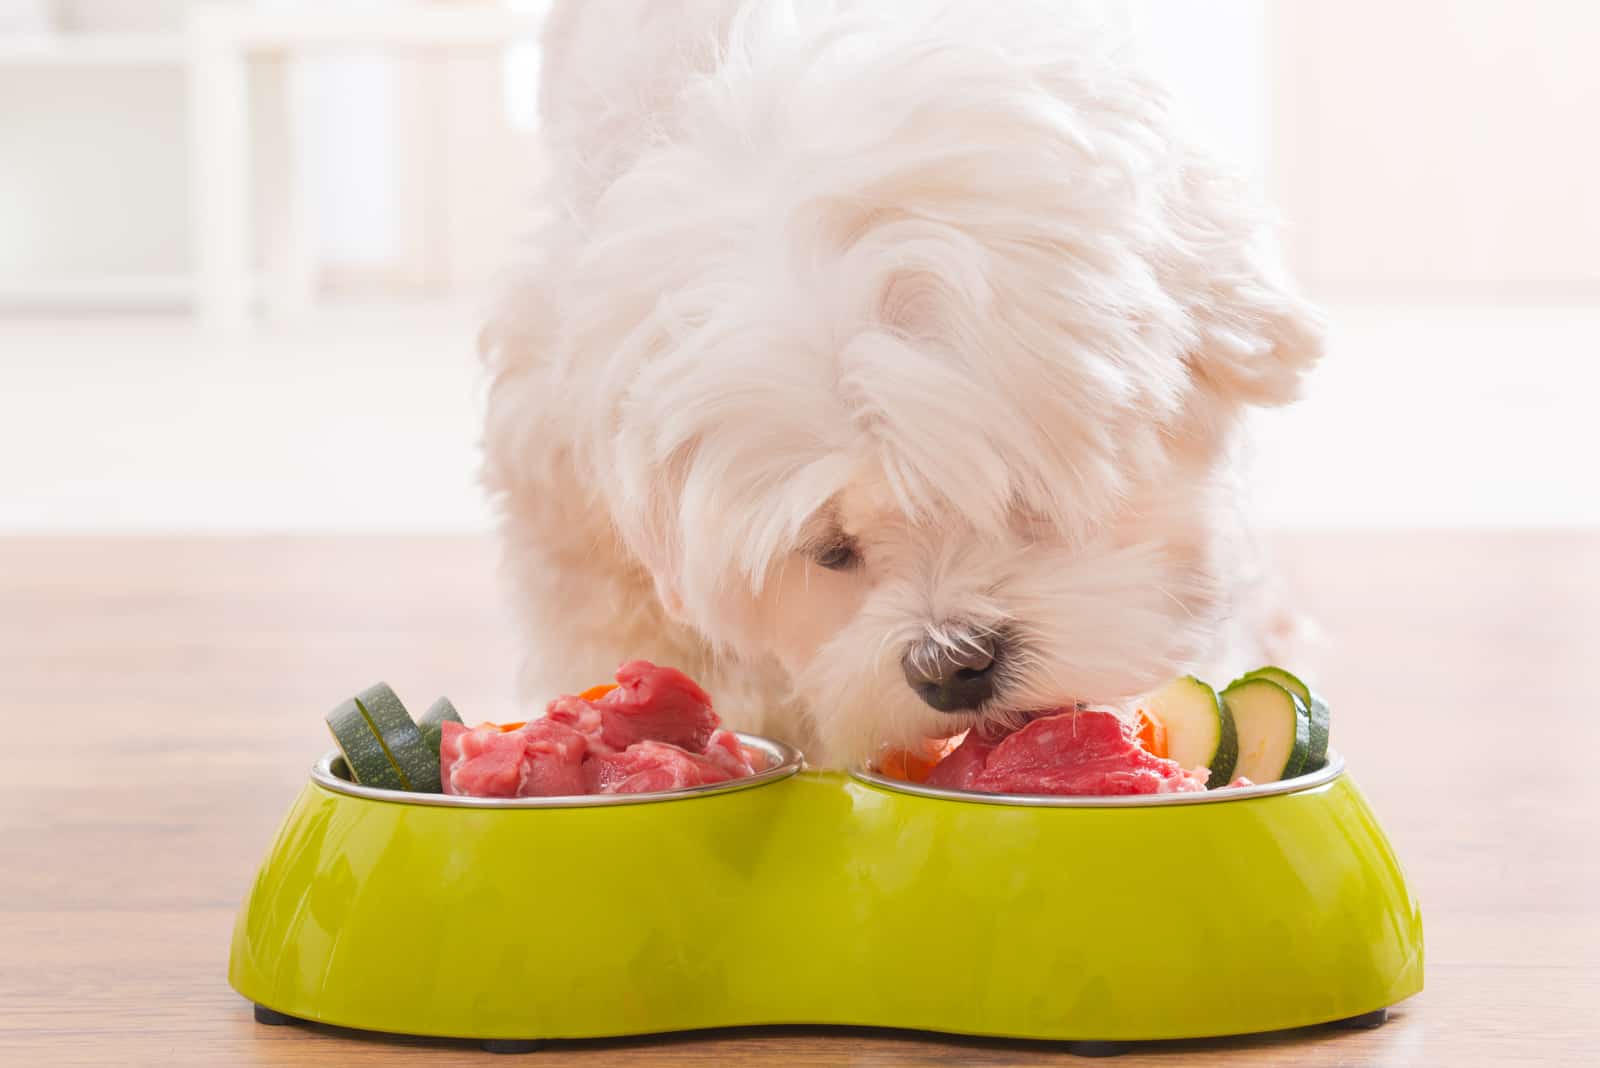 Little dog maltese eating natural, organic food from a bowl at home